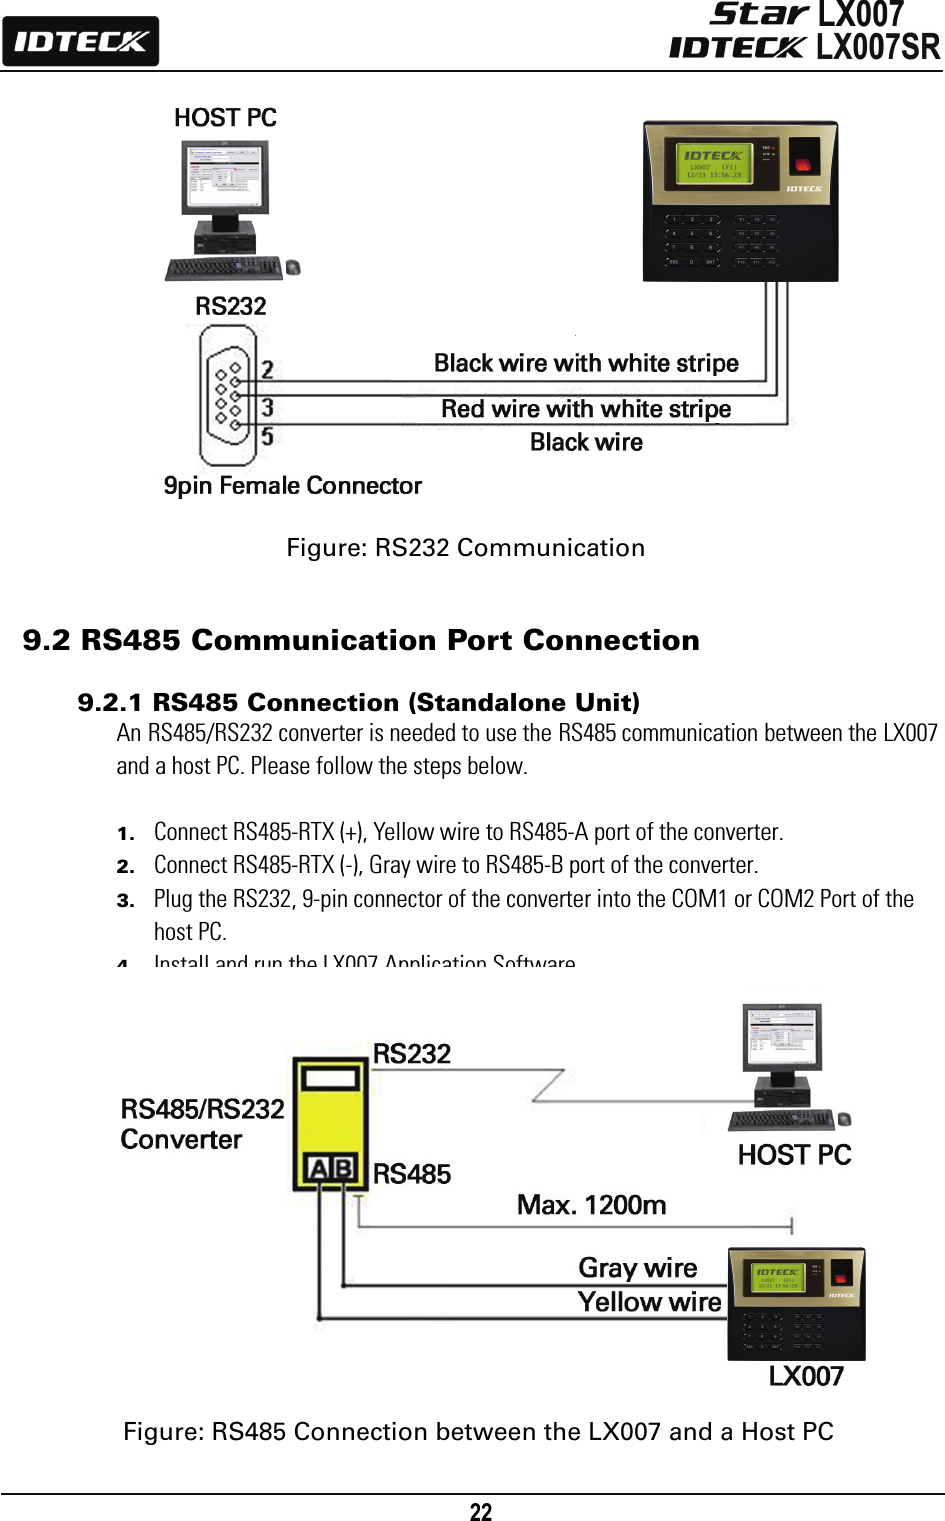                                                                                    22                      Figure: RS232 Communication   9.2 RS485 Communication Port Connection  9.2.1 RS485 Connection (Standalone Unit) An RS485/RS232 converter is needed to use the RS485 communication between the LX007 and a host PC. Please follow the steps below.  1. Connect RS485-RTX (+), Yellow wire to RS485-A port of the converter. 2. Connect RS485-RTX (-), Gray wire to RS485-B port of the converter. 3. Plug the RS232, 9-pin connector of the converter into the COM1 or COM2 Port of the host PC. 4. Install and run the LX007 Application Software.                  Figure: RS485 Connection between the LX007 and a Host PC  